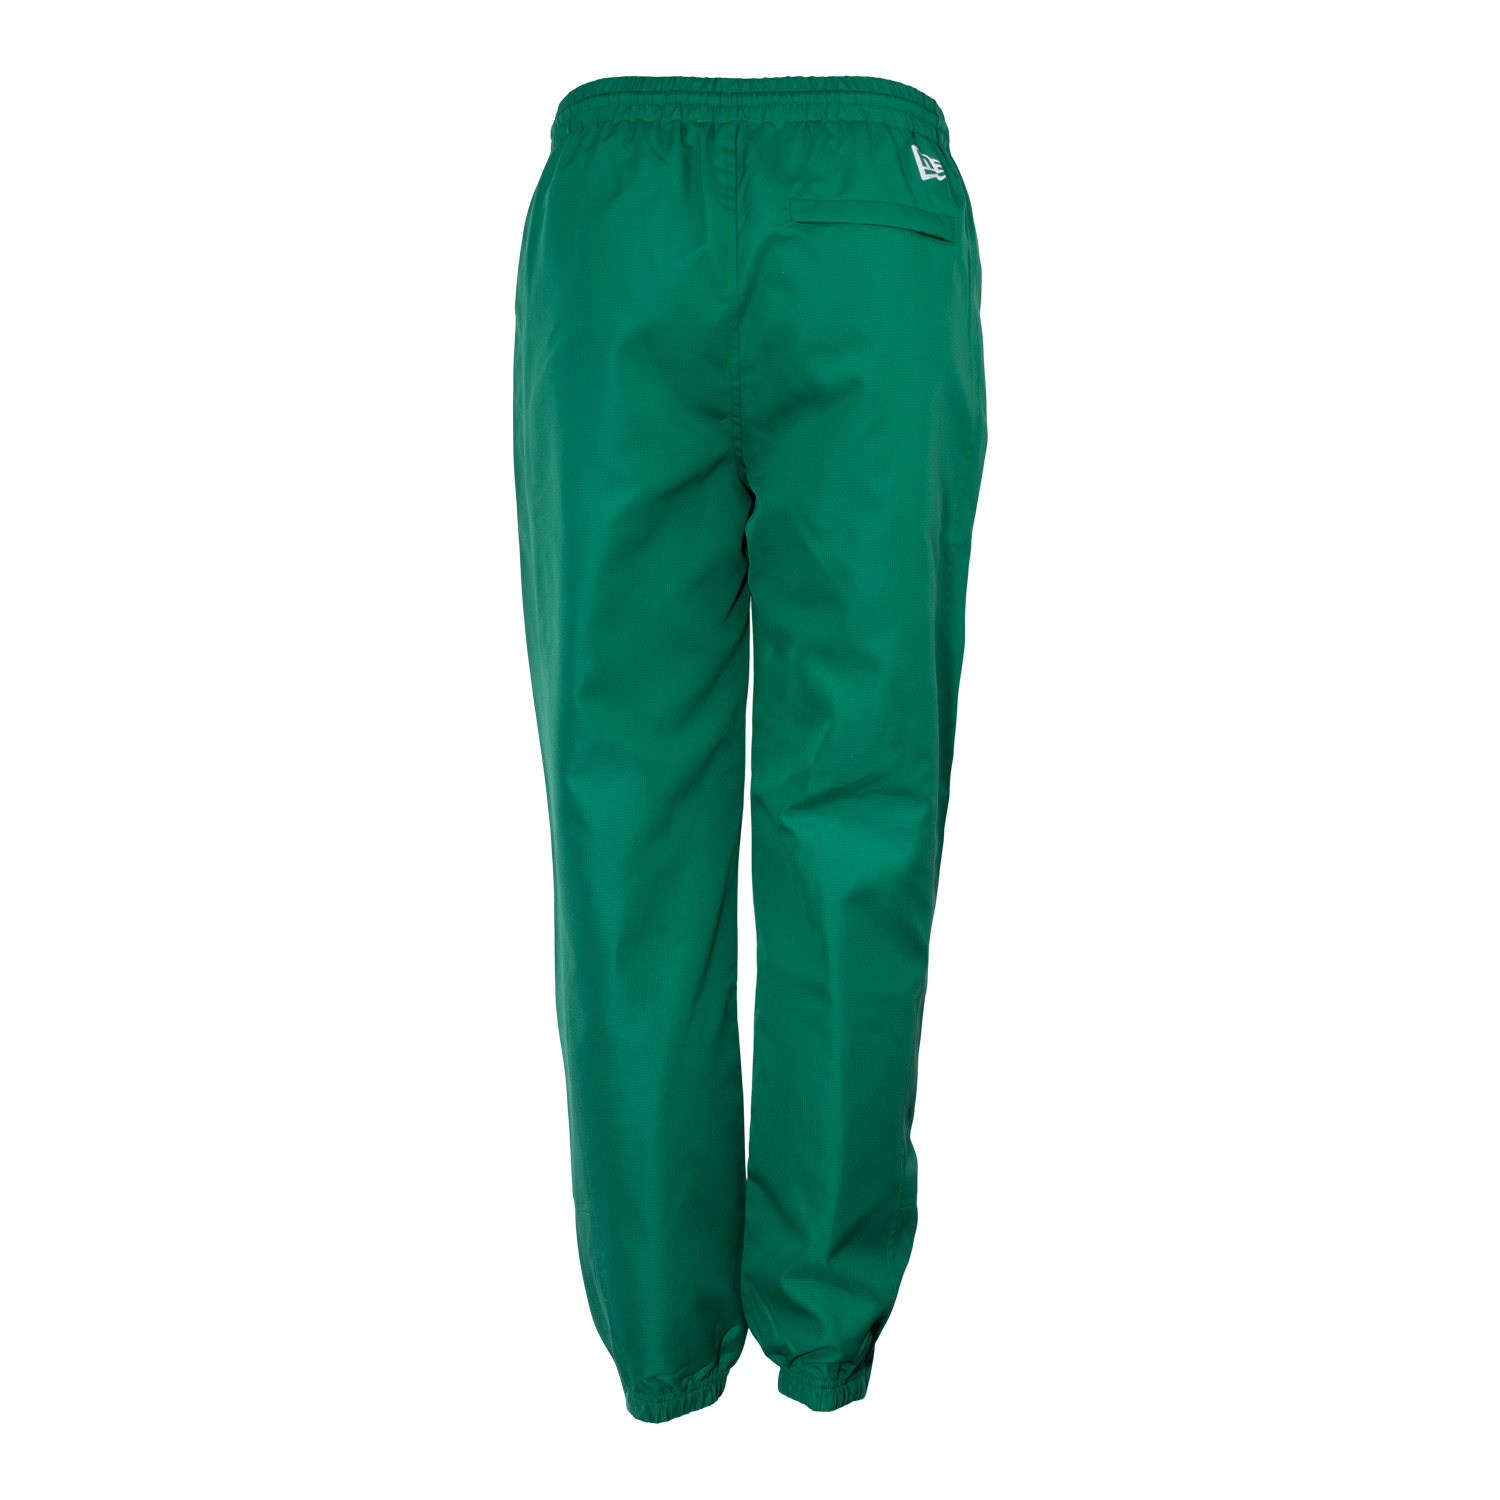 Sideline Friction Woven Ripstop Pants